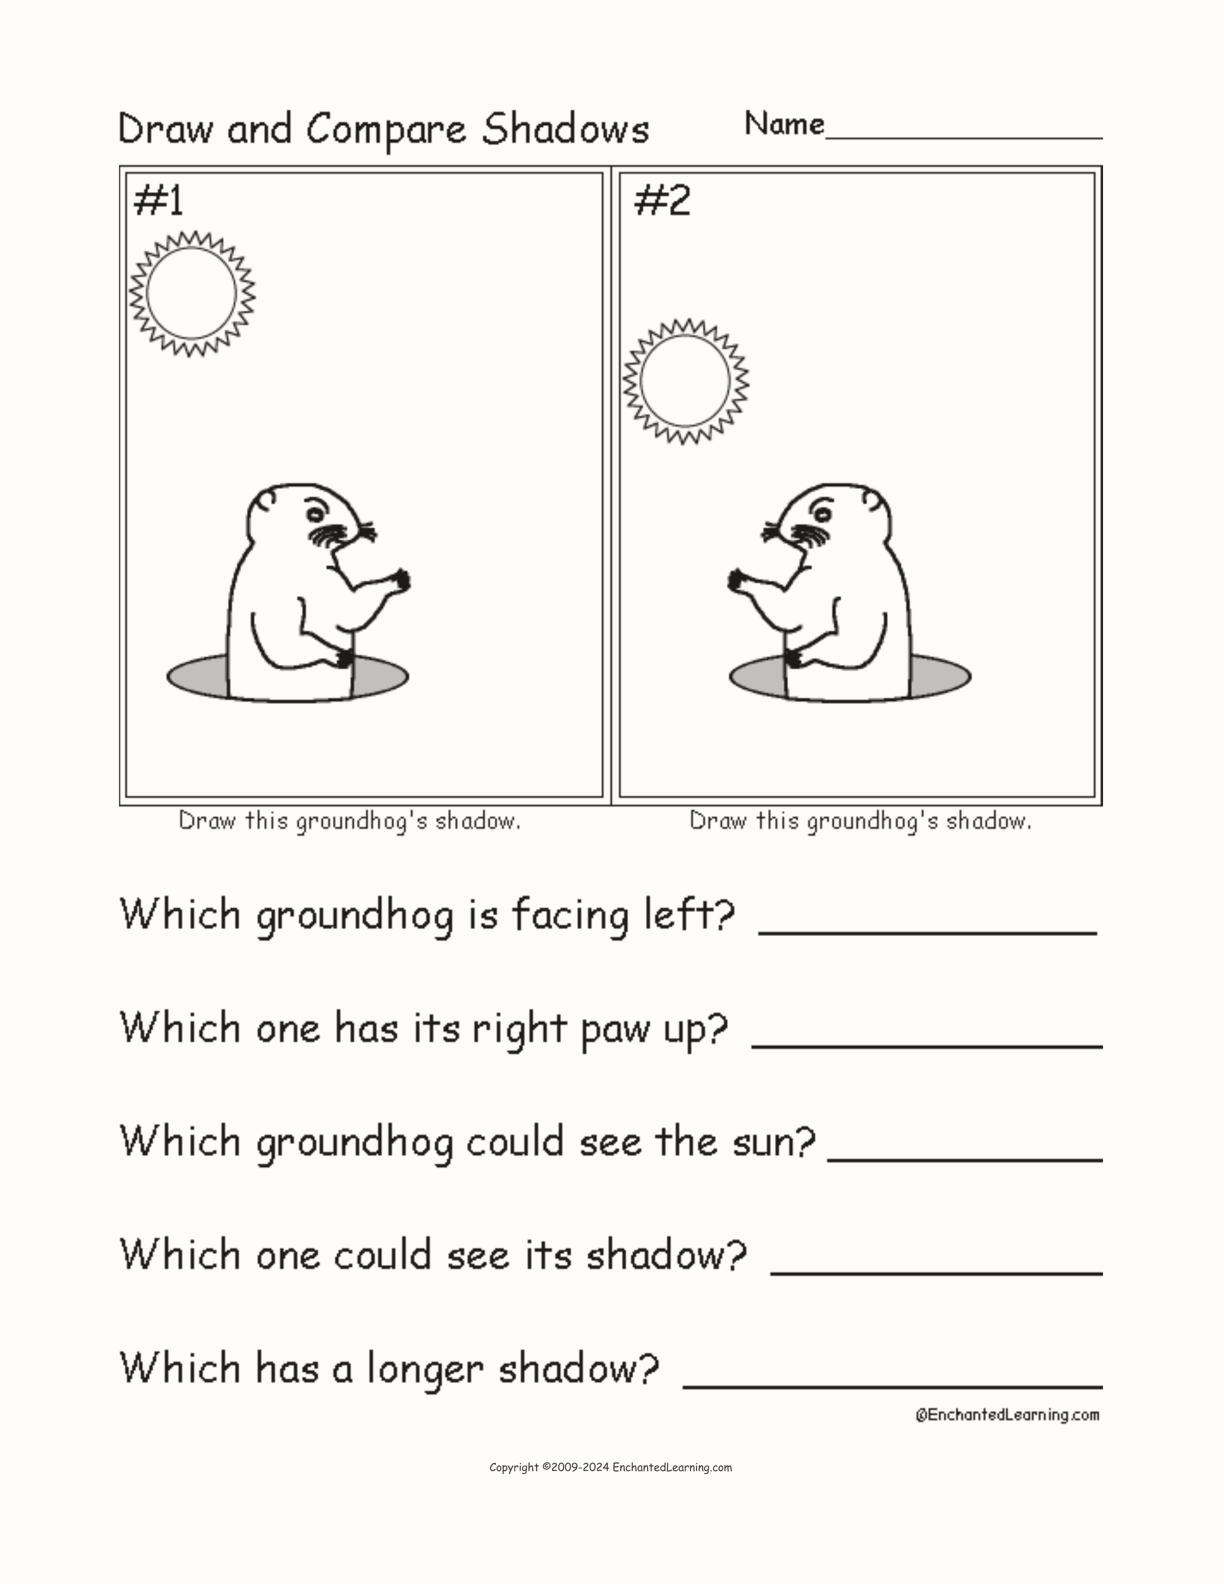 Draw and Compare Groundhog Shadows interactive worksheet page 1